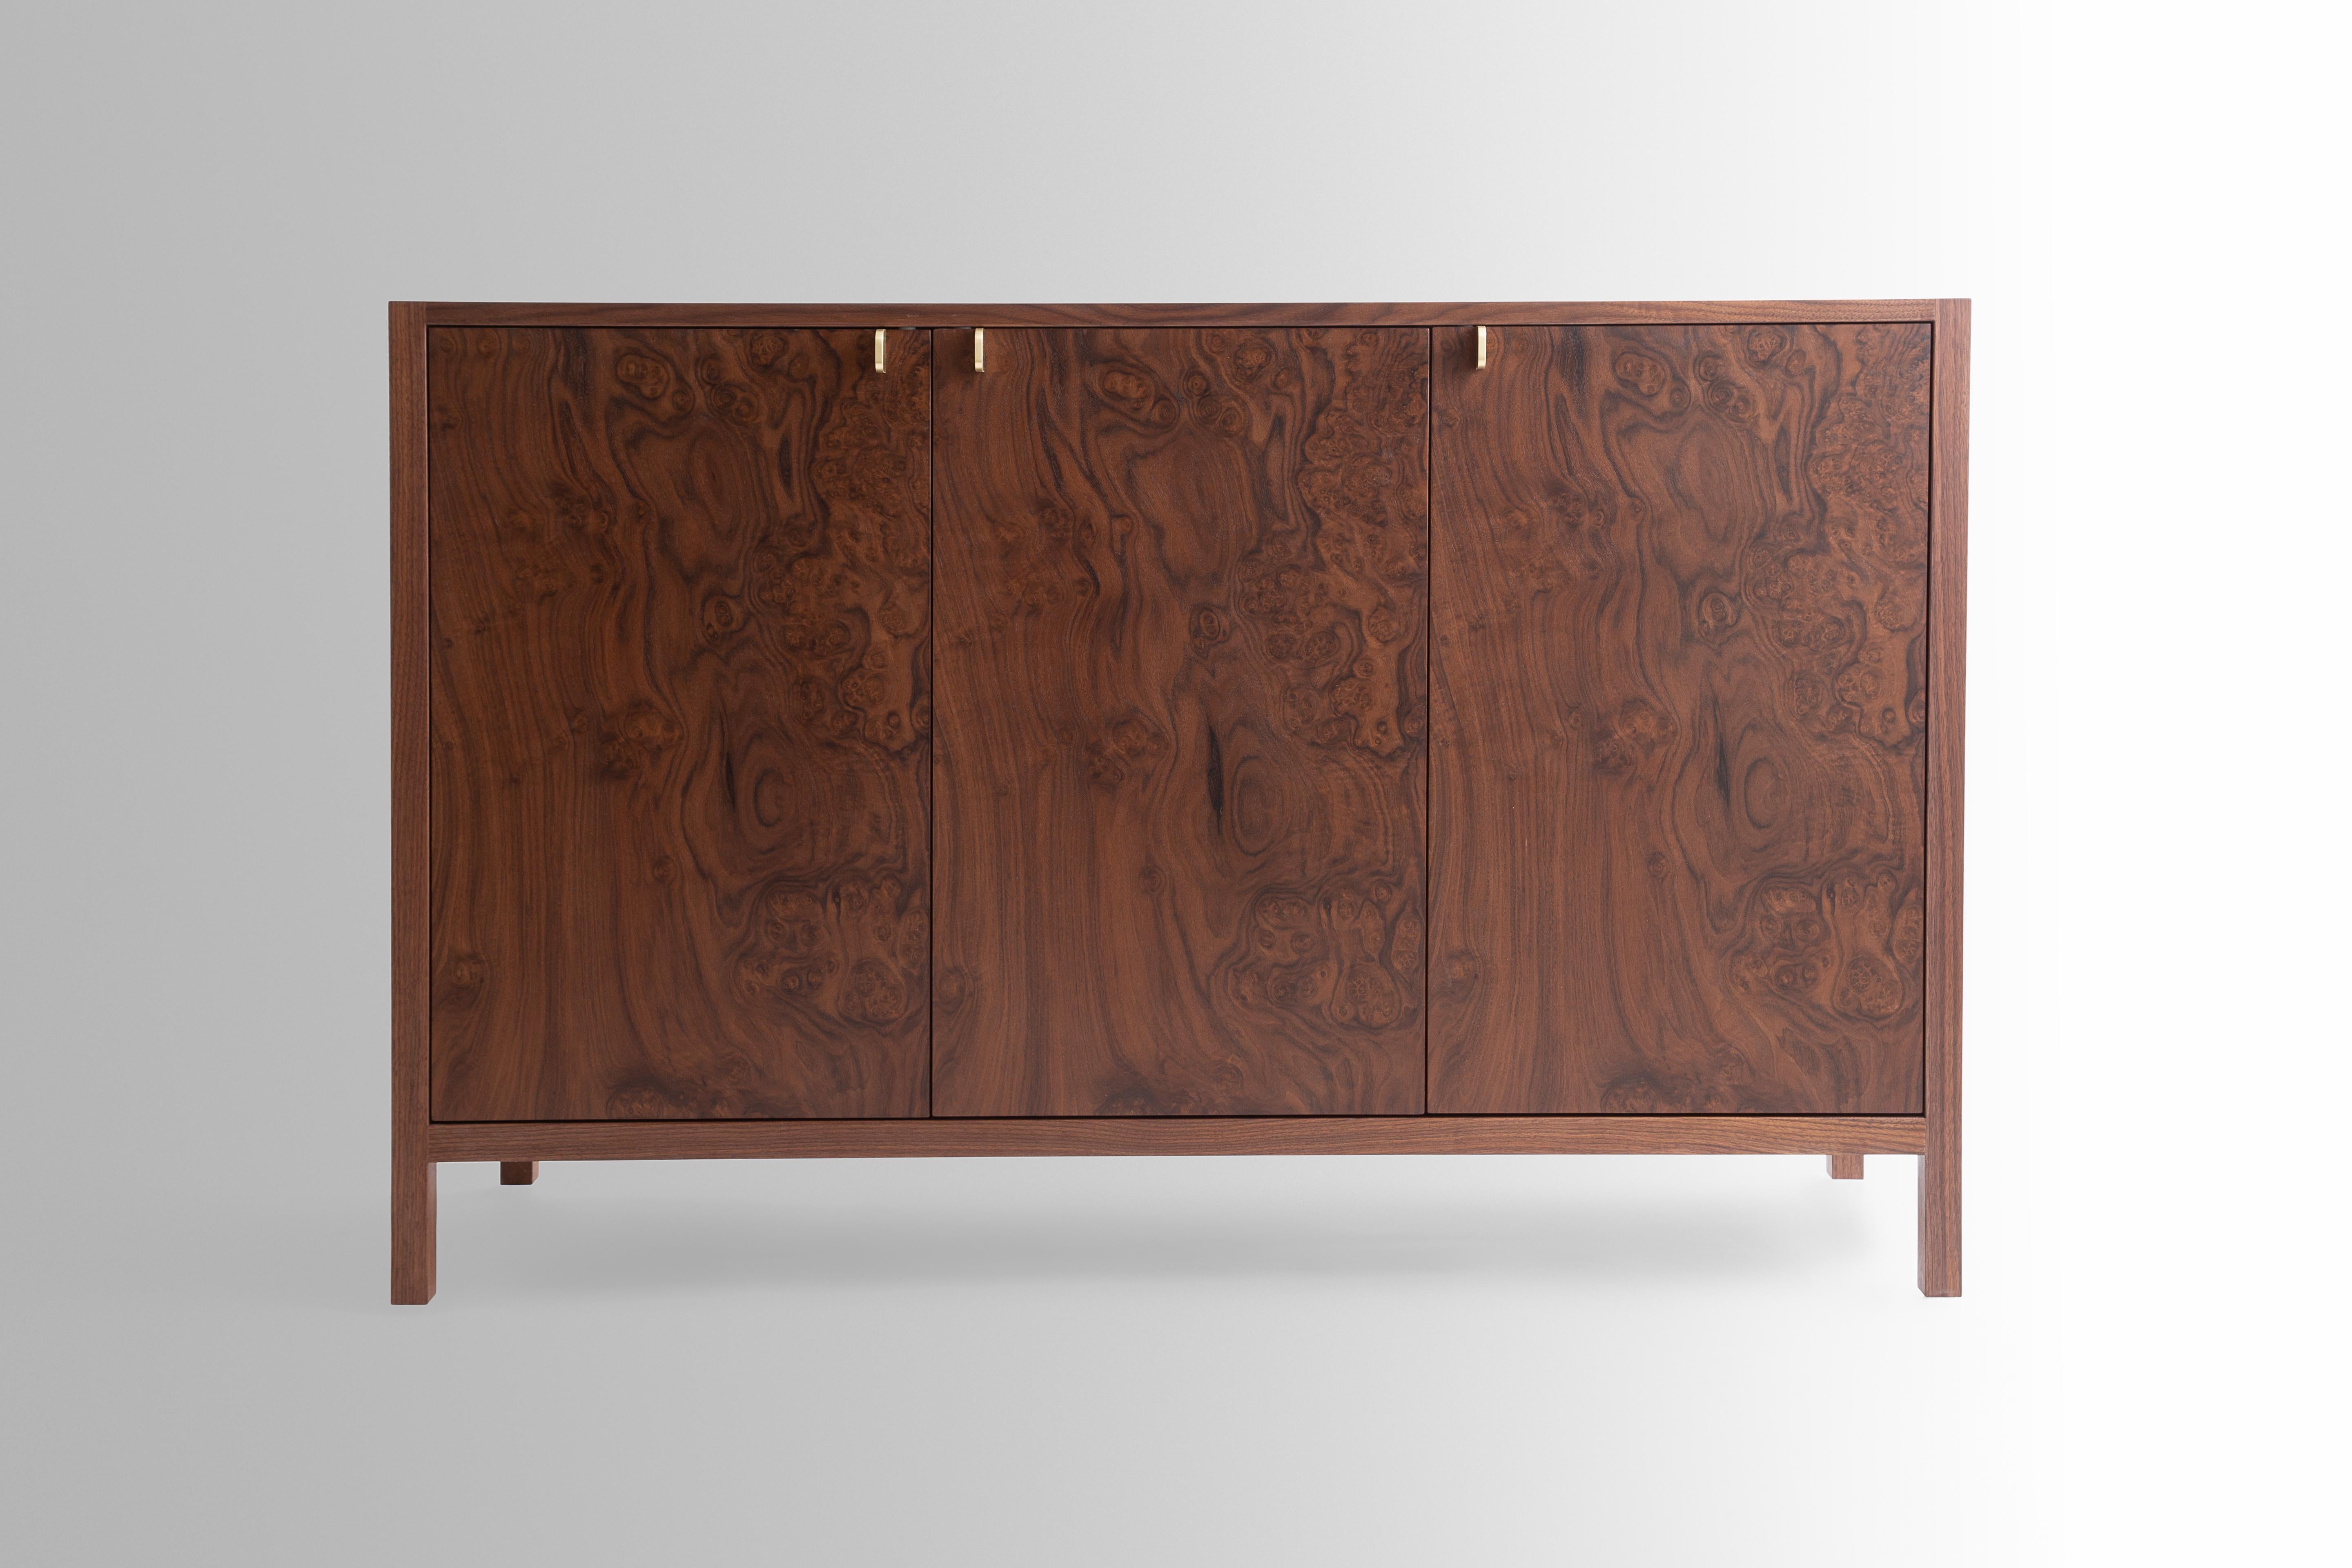 The Laska credenza is built in our Louisville studio using premium hardwoods and thoughtfully selected wood veneers. This piece features custom veneered panels framed flush with solid hardwood edges and legs. The three doors showcase crotch-cut